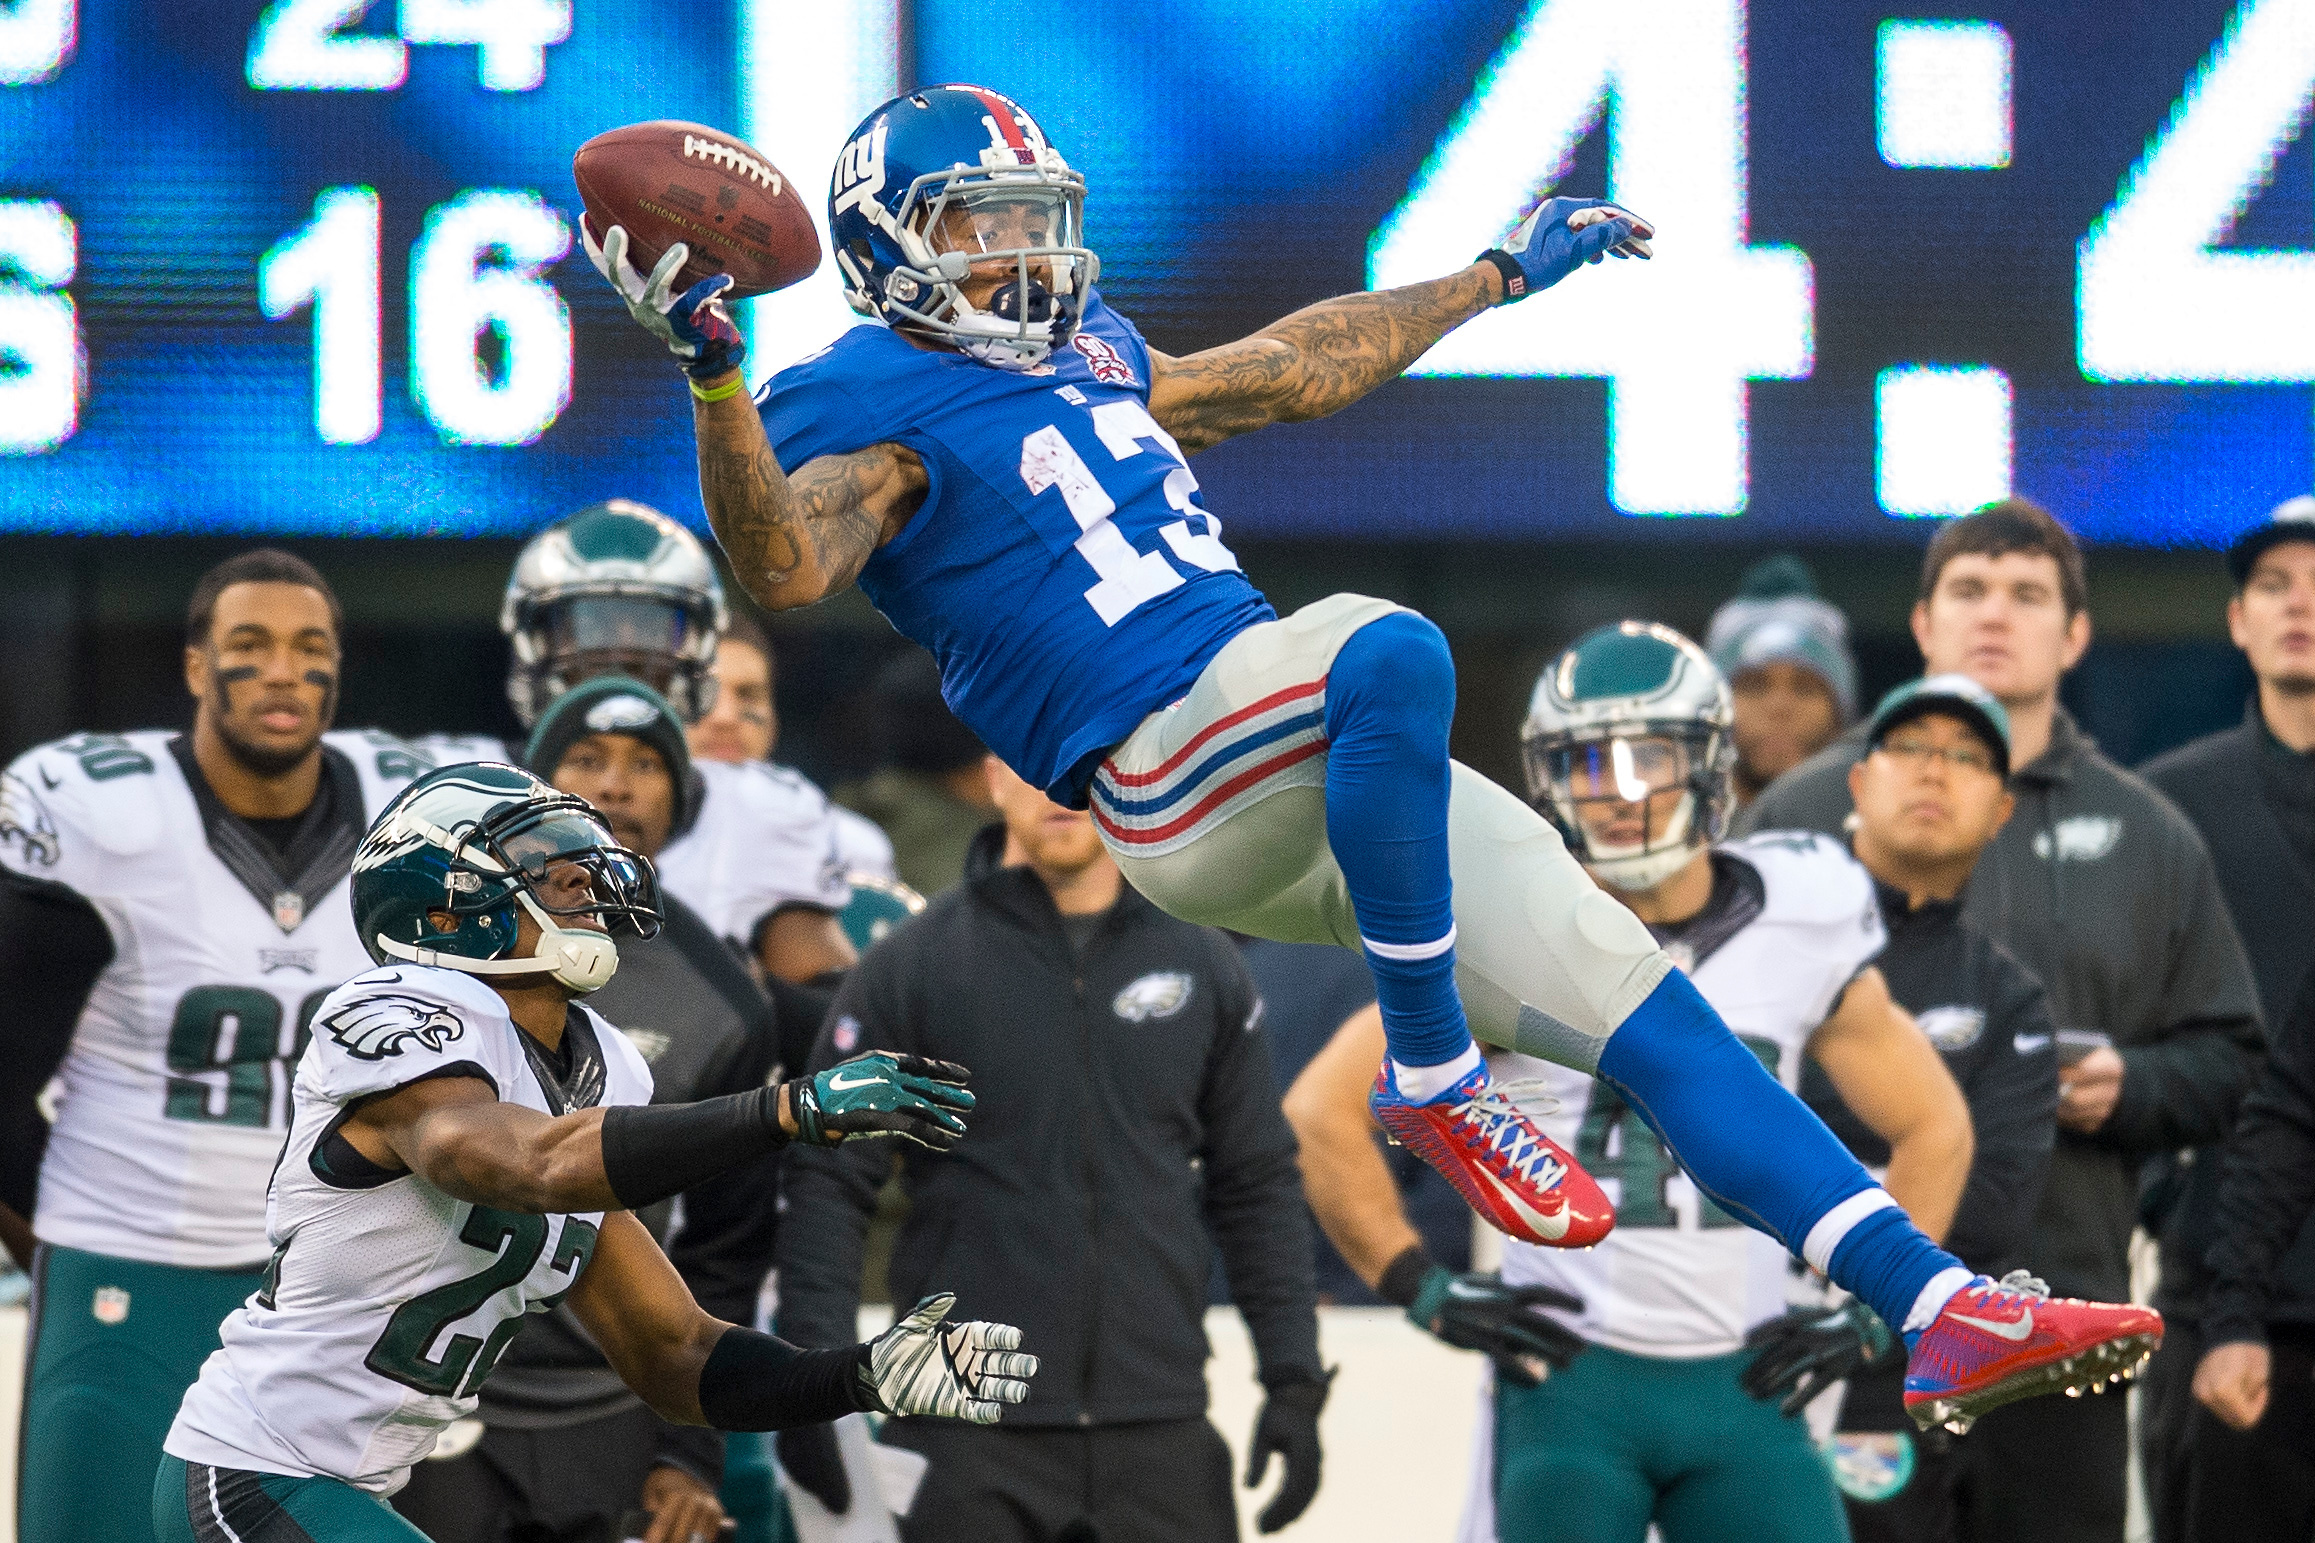 Giants' Odell Beckham Jr. almost recreates amazing 1-handed catch, breaks  NFL record for receiving yards